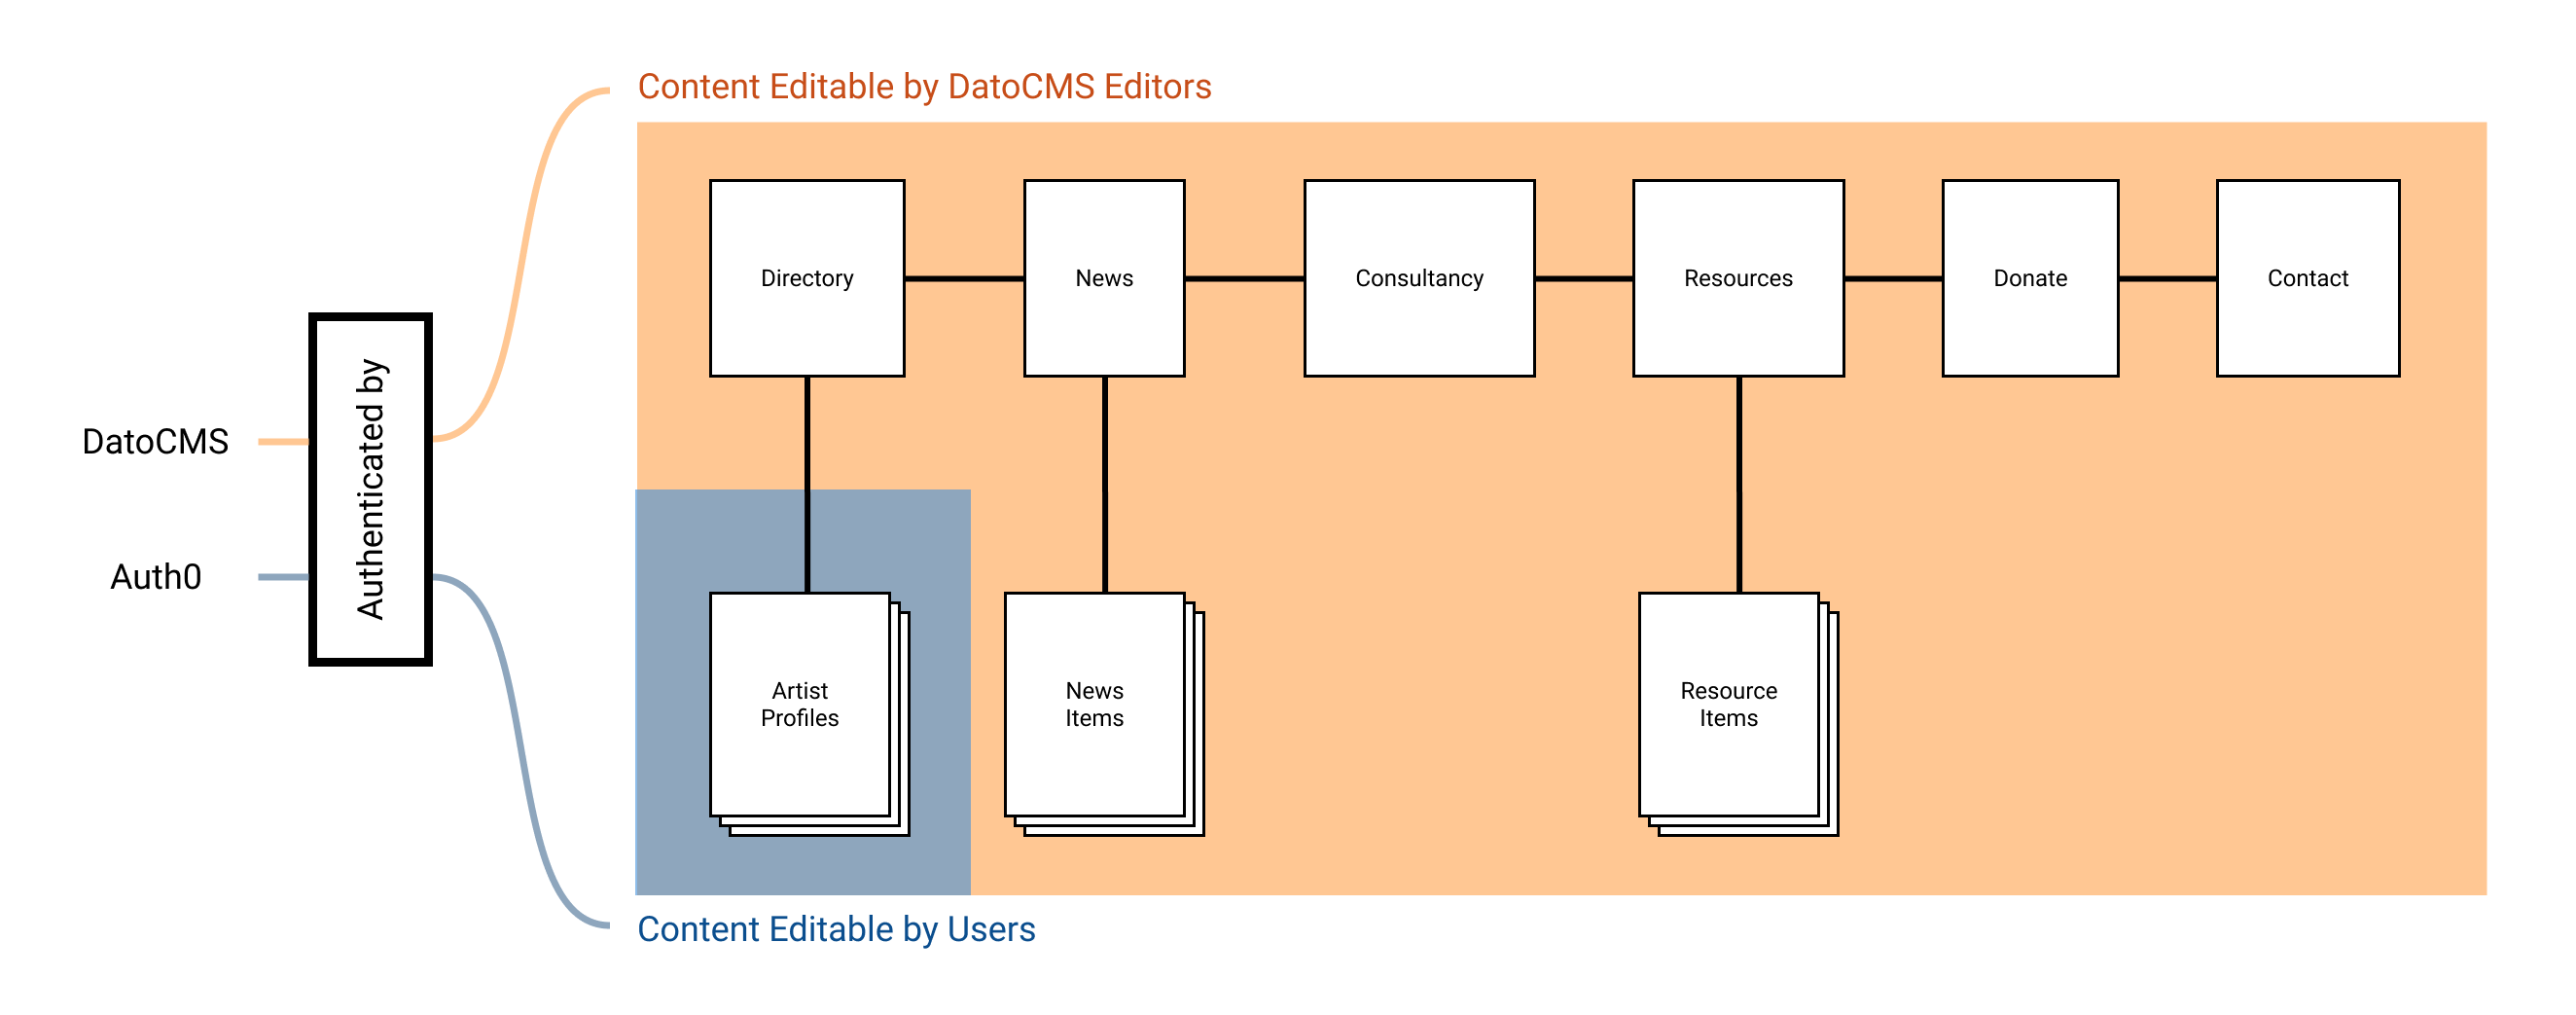 Architecture diagram of the site showing how the whole site is editable by site editors authorized by DatoCMS, and the profile pages are editable by artists authorized by the third-party service Auth0.